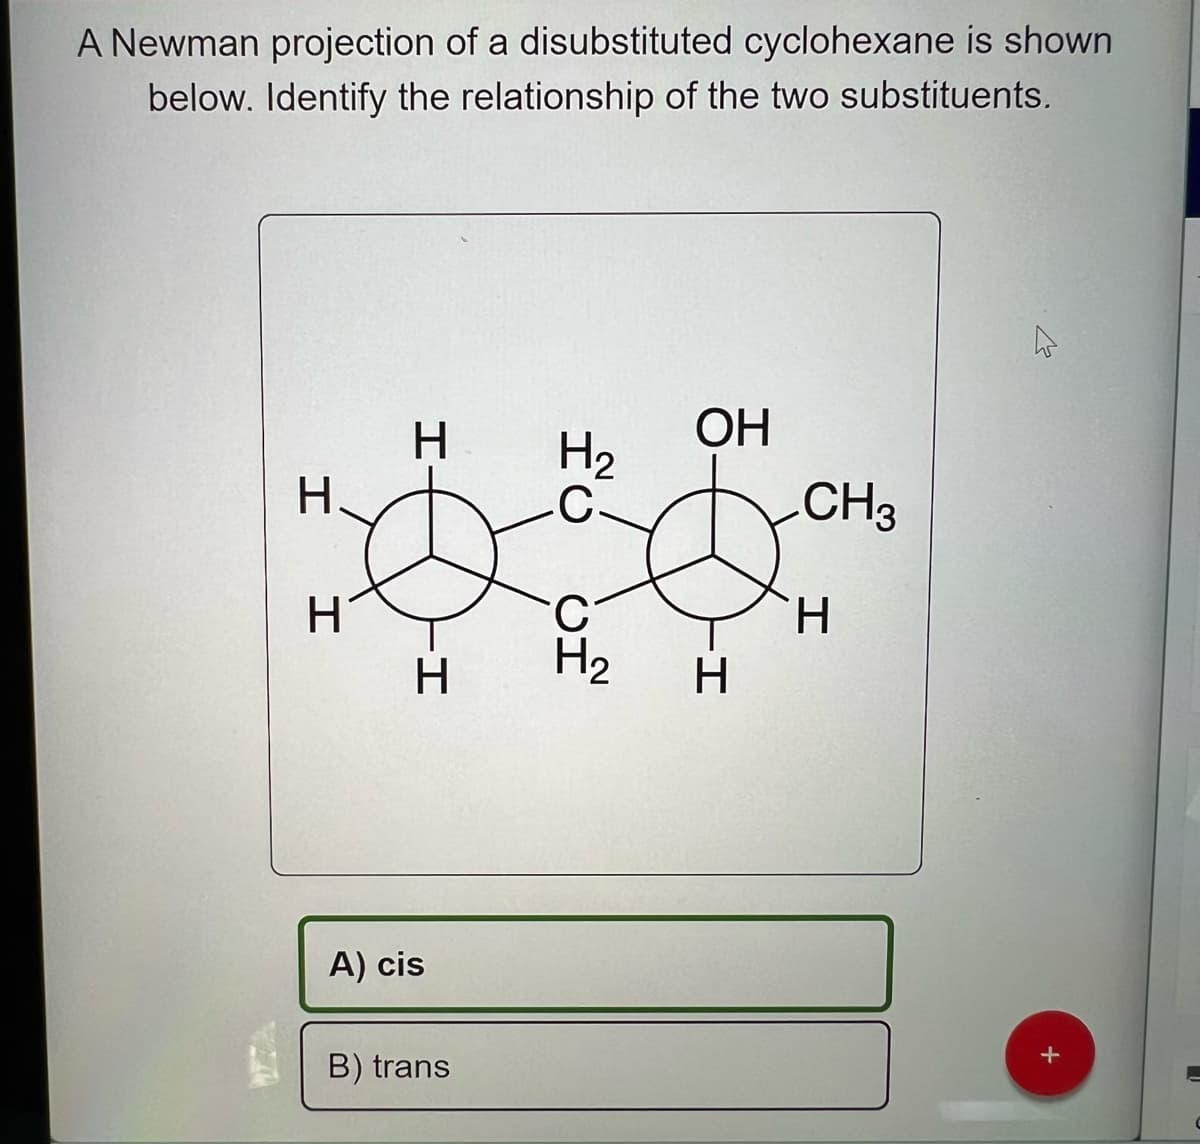 A Newman projection of a disubstituted cyclohexane is shown
below. Identify the relationship of the two substituents.
124
H.
H
H
-H
A) cis
B) trans
H₂
C.
يين
OH
-I
H
CH3
H